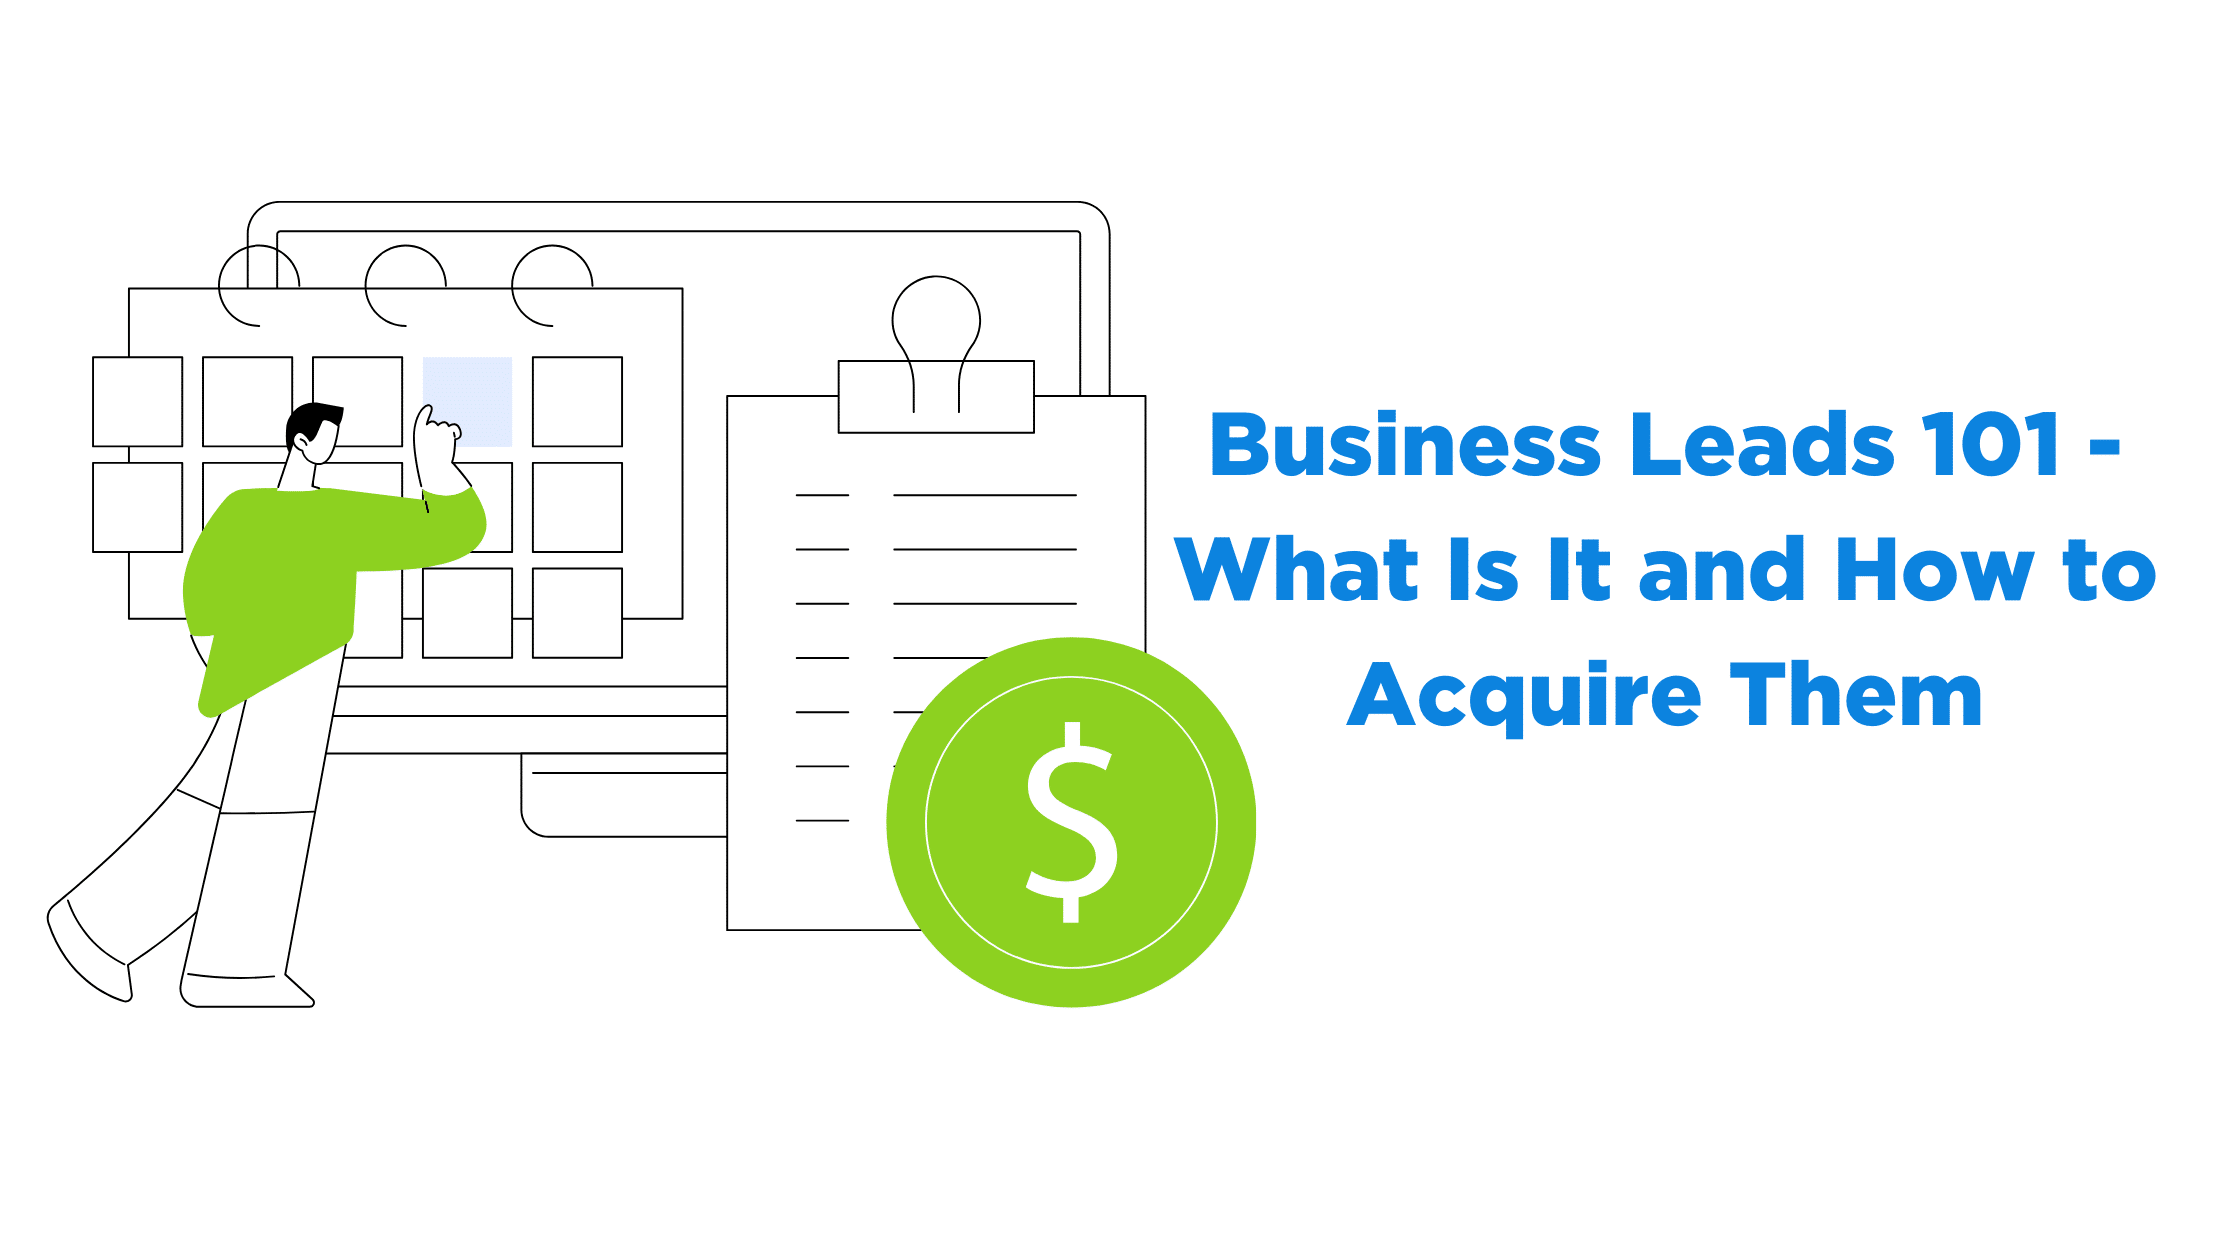 Business Leads 101 - What Is It and How to Acquire Them